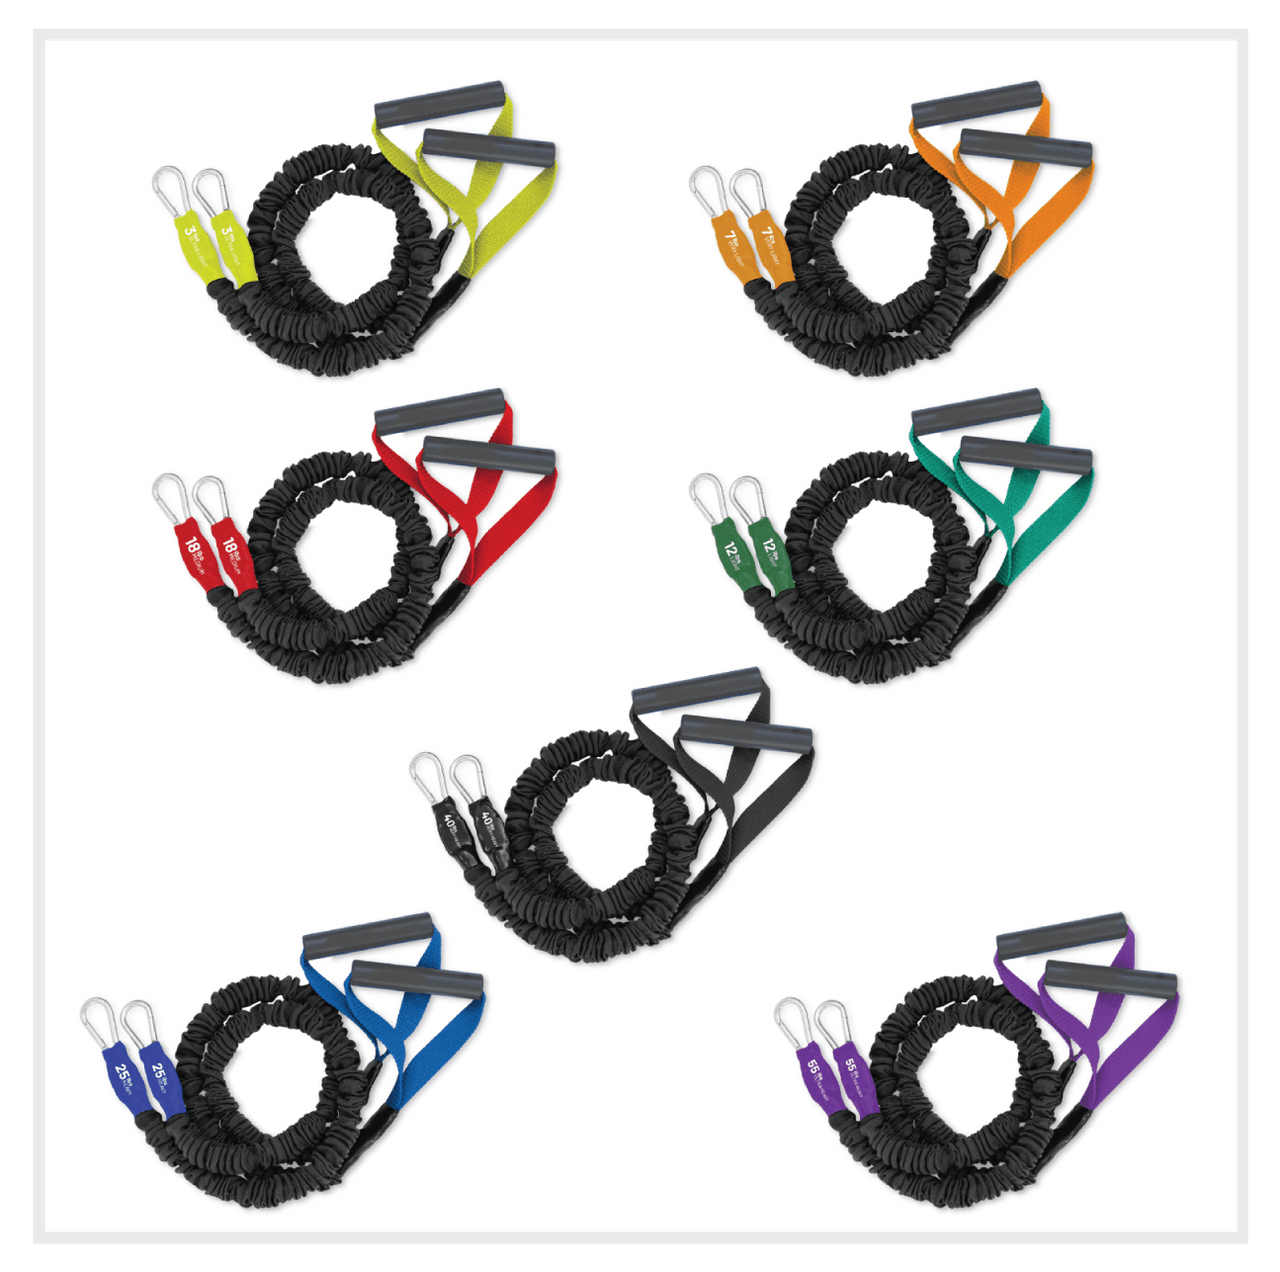 Full set of shoulder and arm resistance bands. Covered for Safety and made in America. These bands come in a set of 2 with a handle and clip on each for forming an X by crossing the 2 bands over and strengthening smaller shoulder muscles. 7 different resistance levels